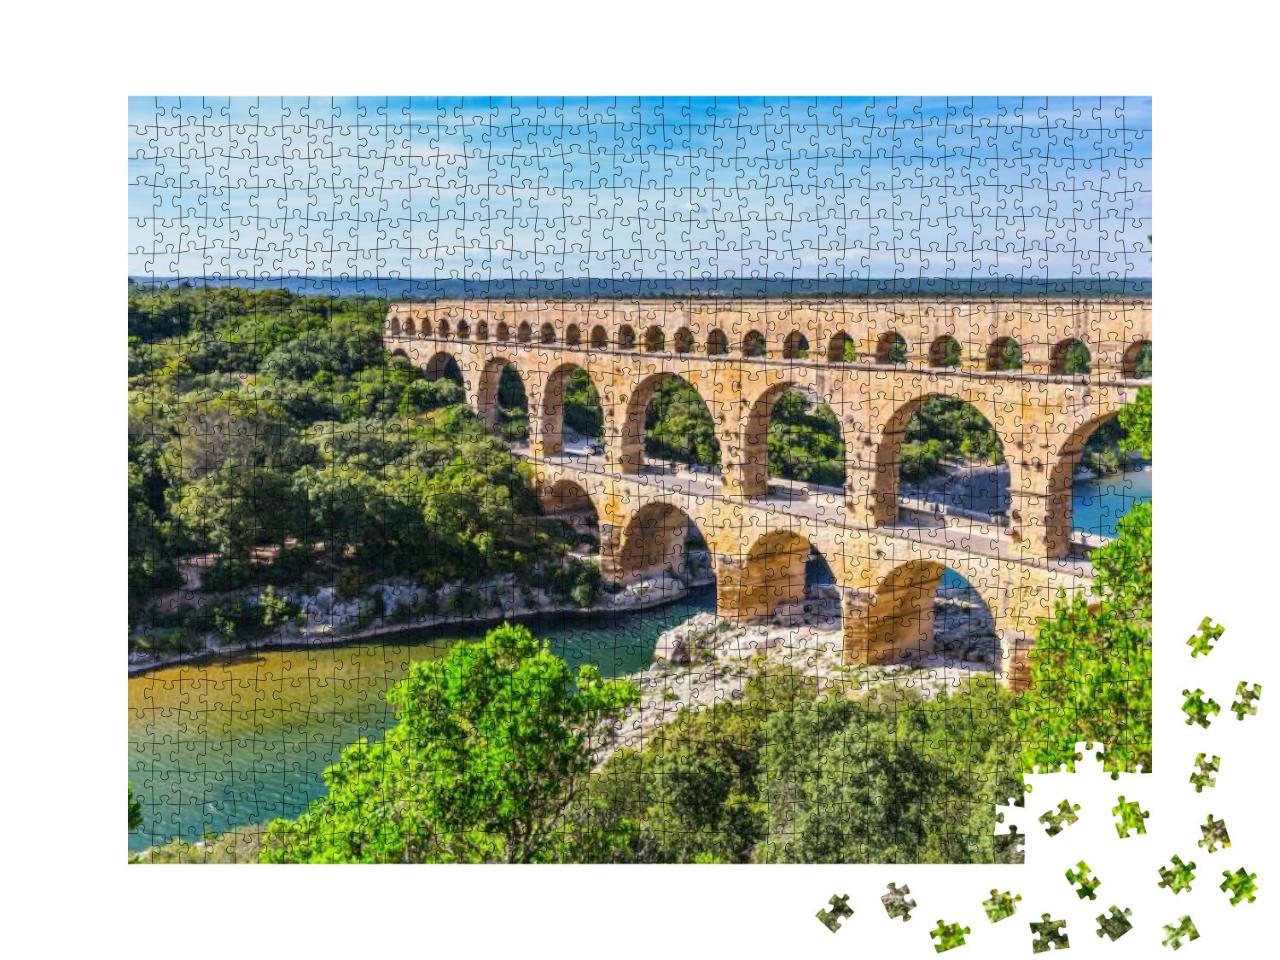 Three-Tiered Aqueduct Pont Du Gard Was Built in Roman Tim... Jigsaw Puzzle with 1000 pieces